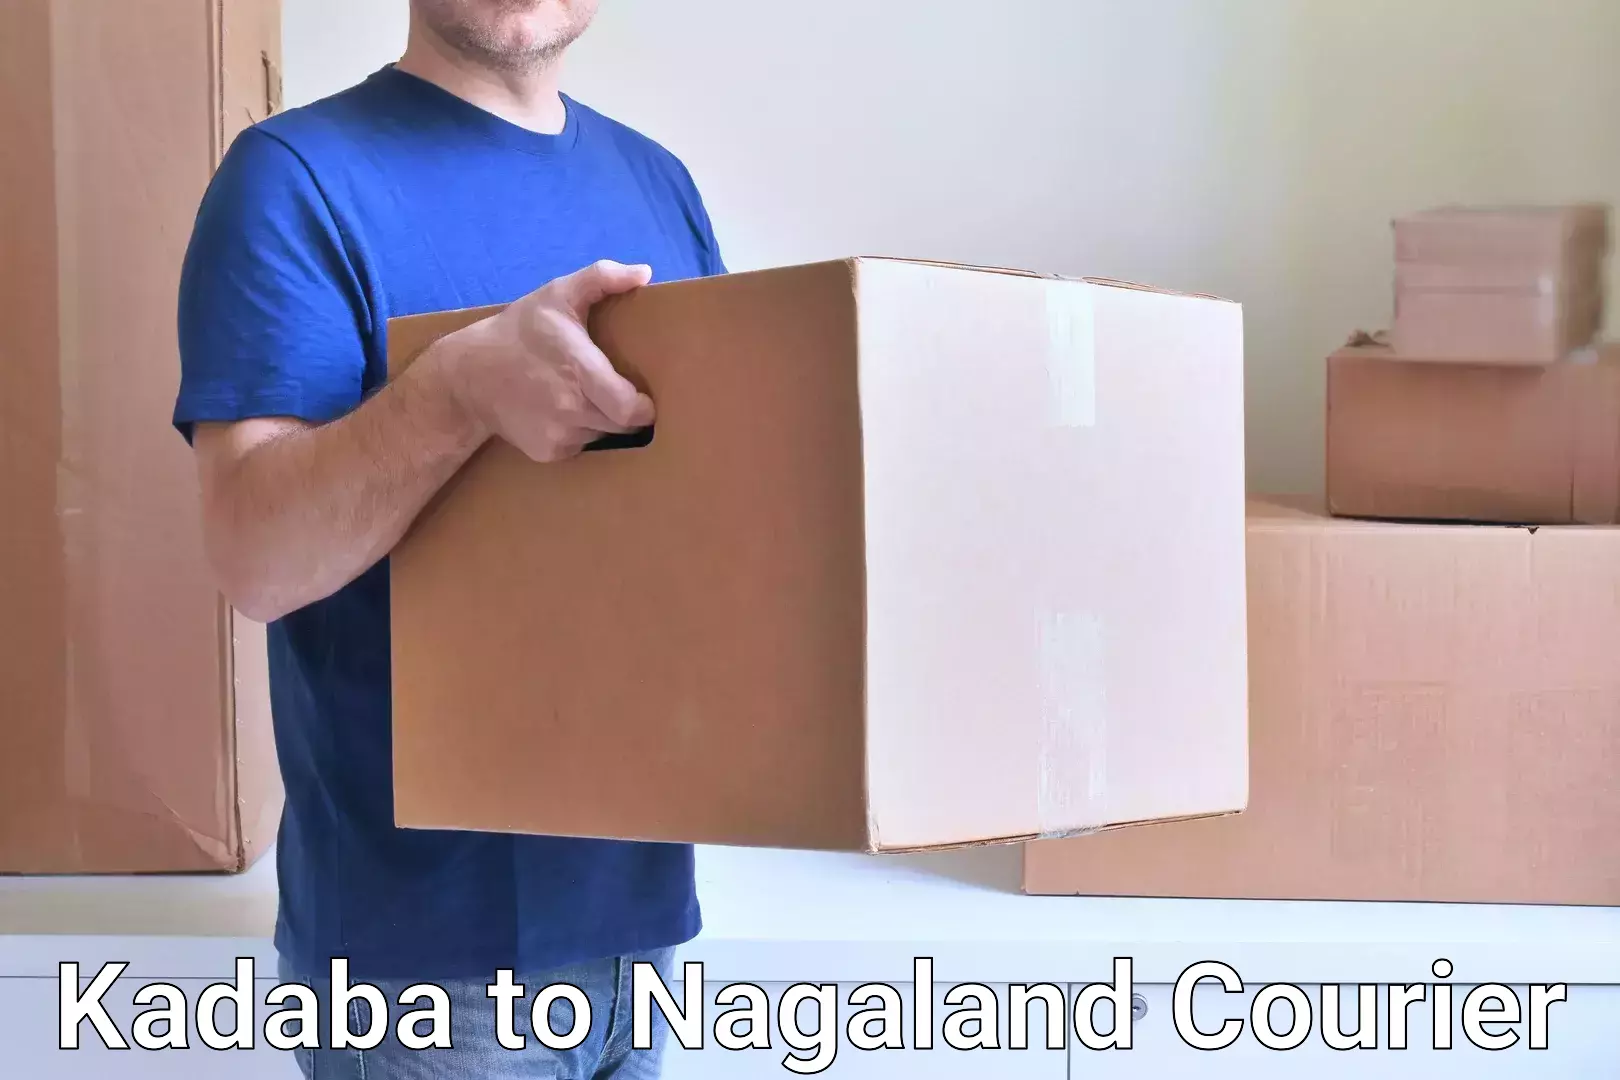 Large package courier Kadaba to Mon